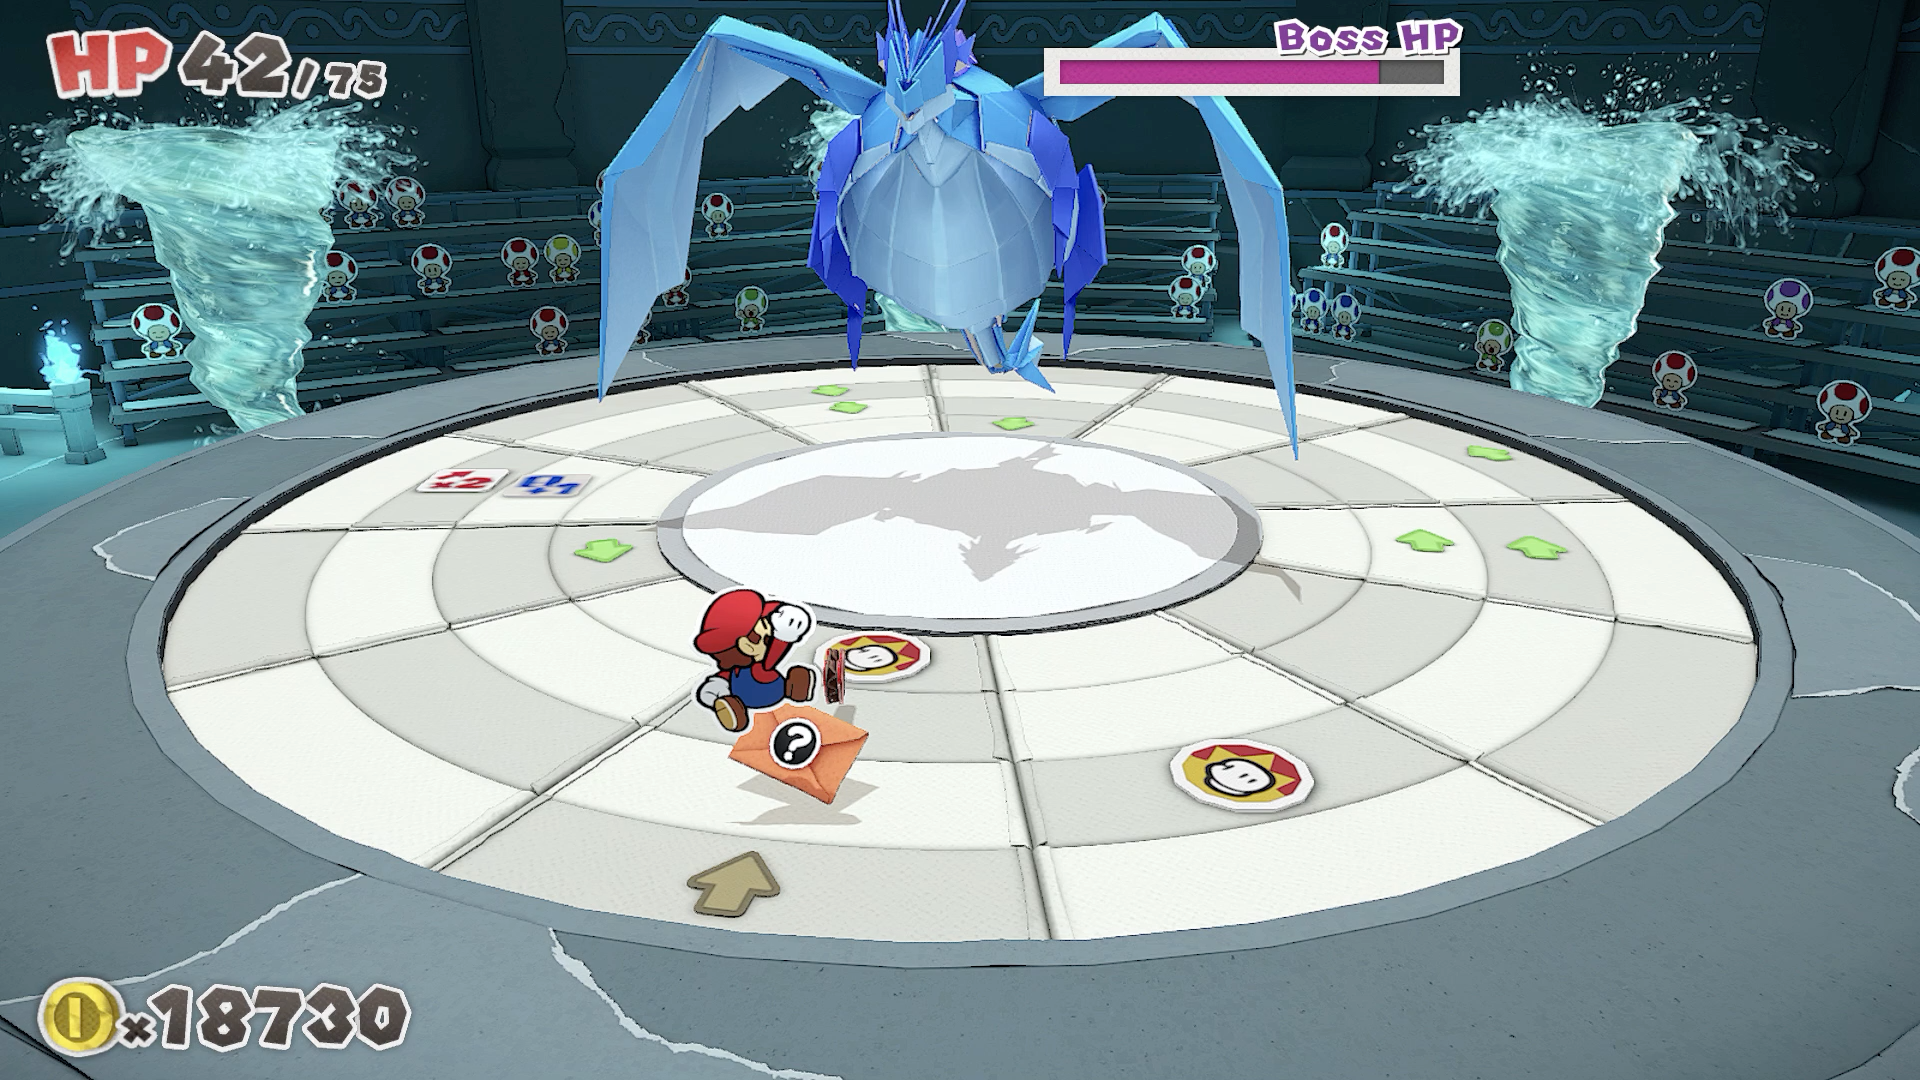 In The Origami King, this is called a fair fight. (Screenshot: Nintendo / Kotaku)